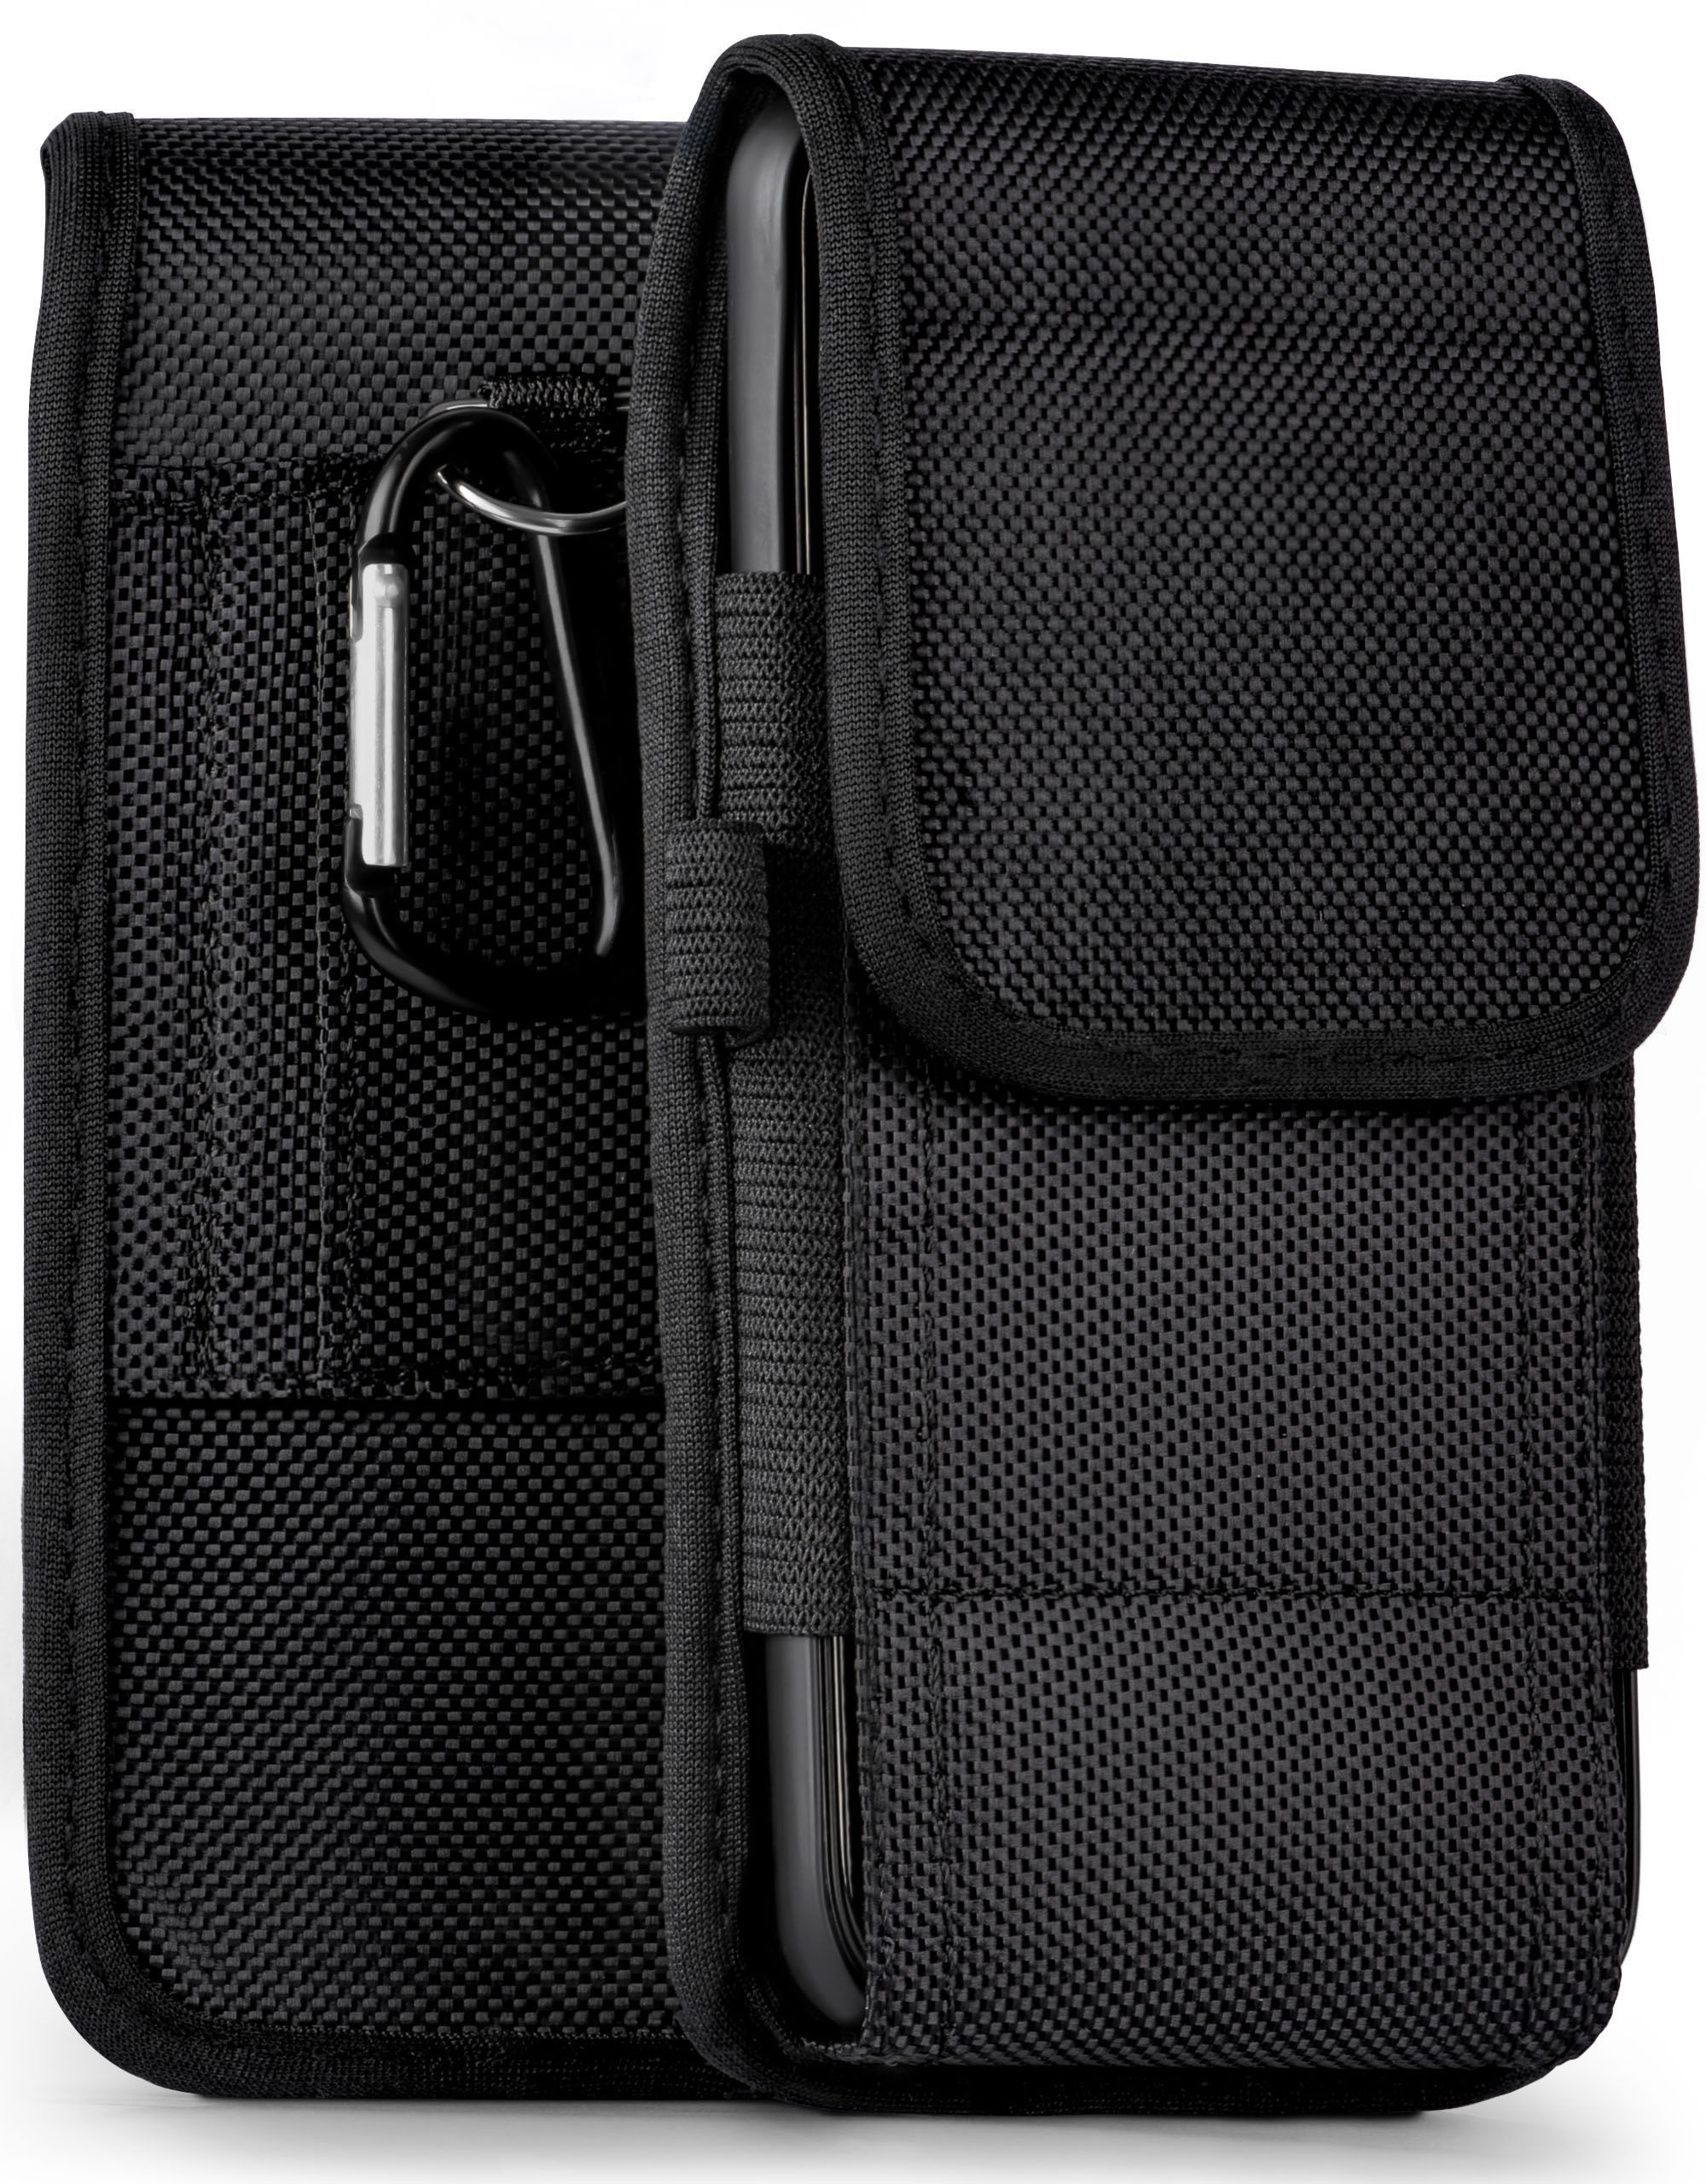 3a, Agility Google, MOEX Trail Pixel Case, Holster,